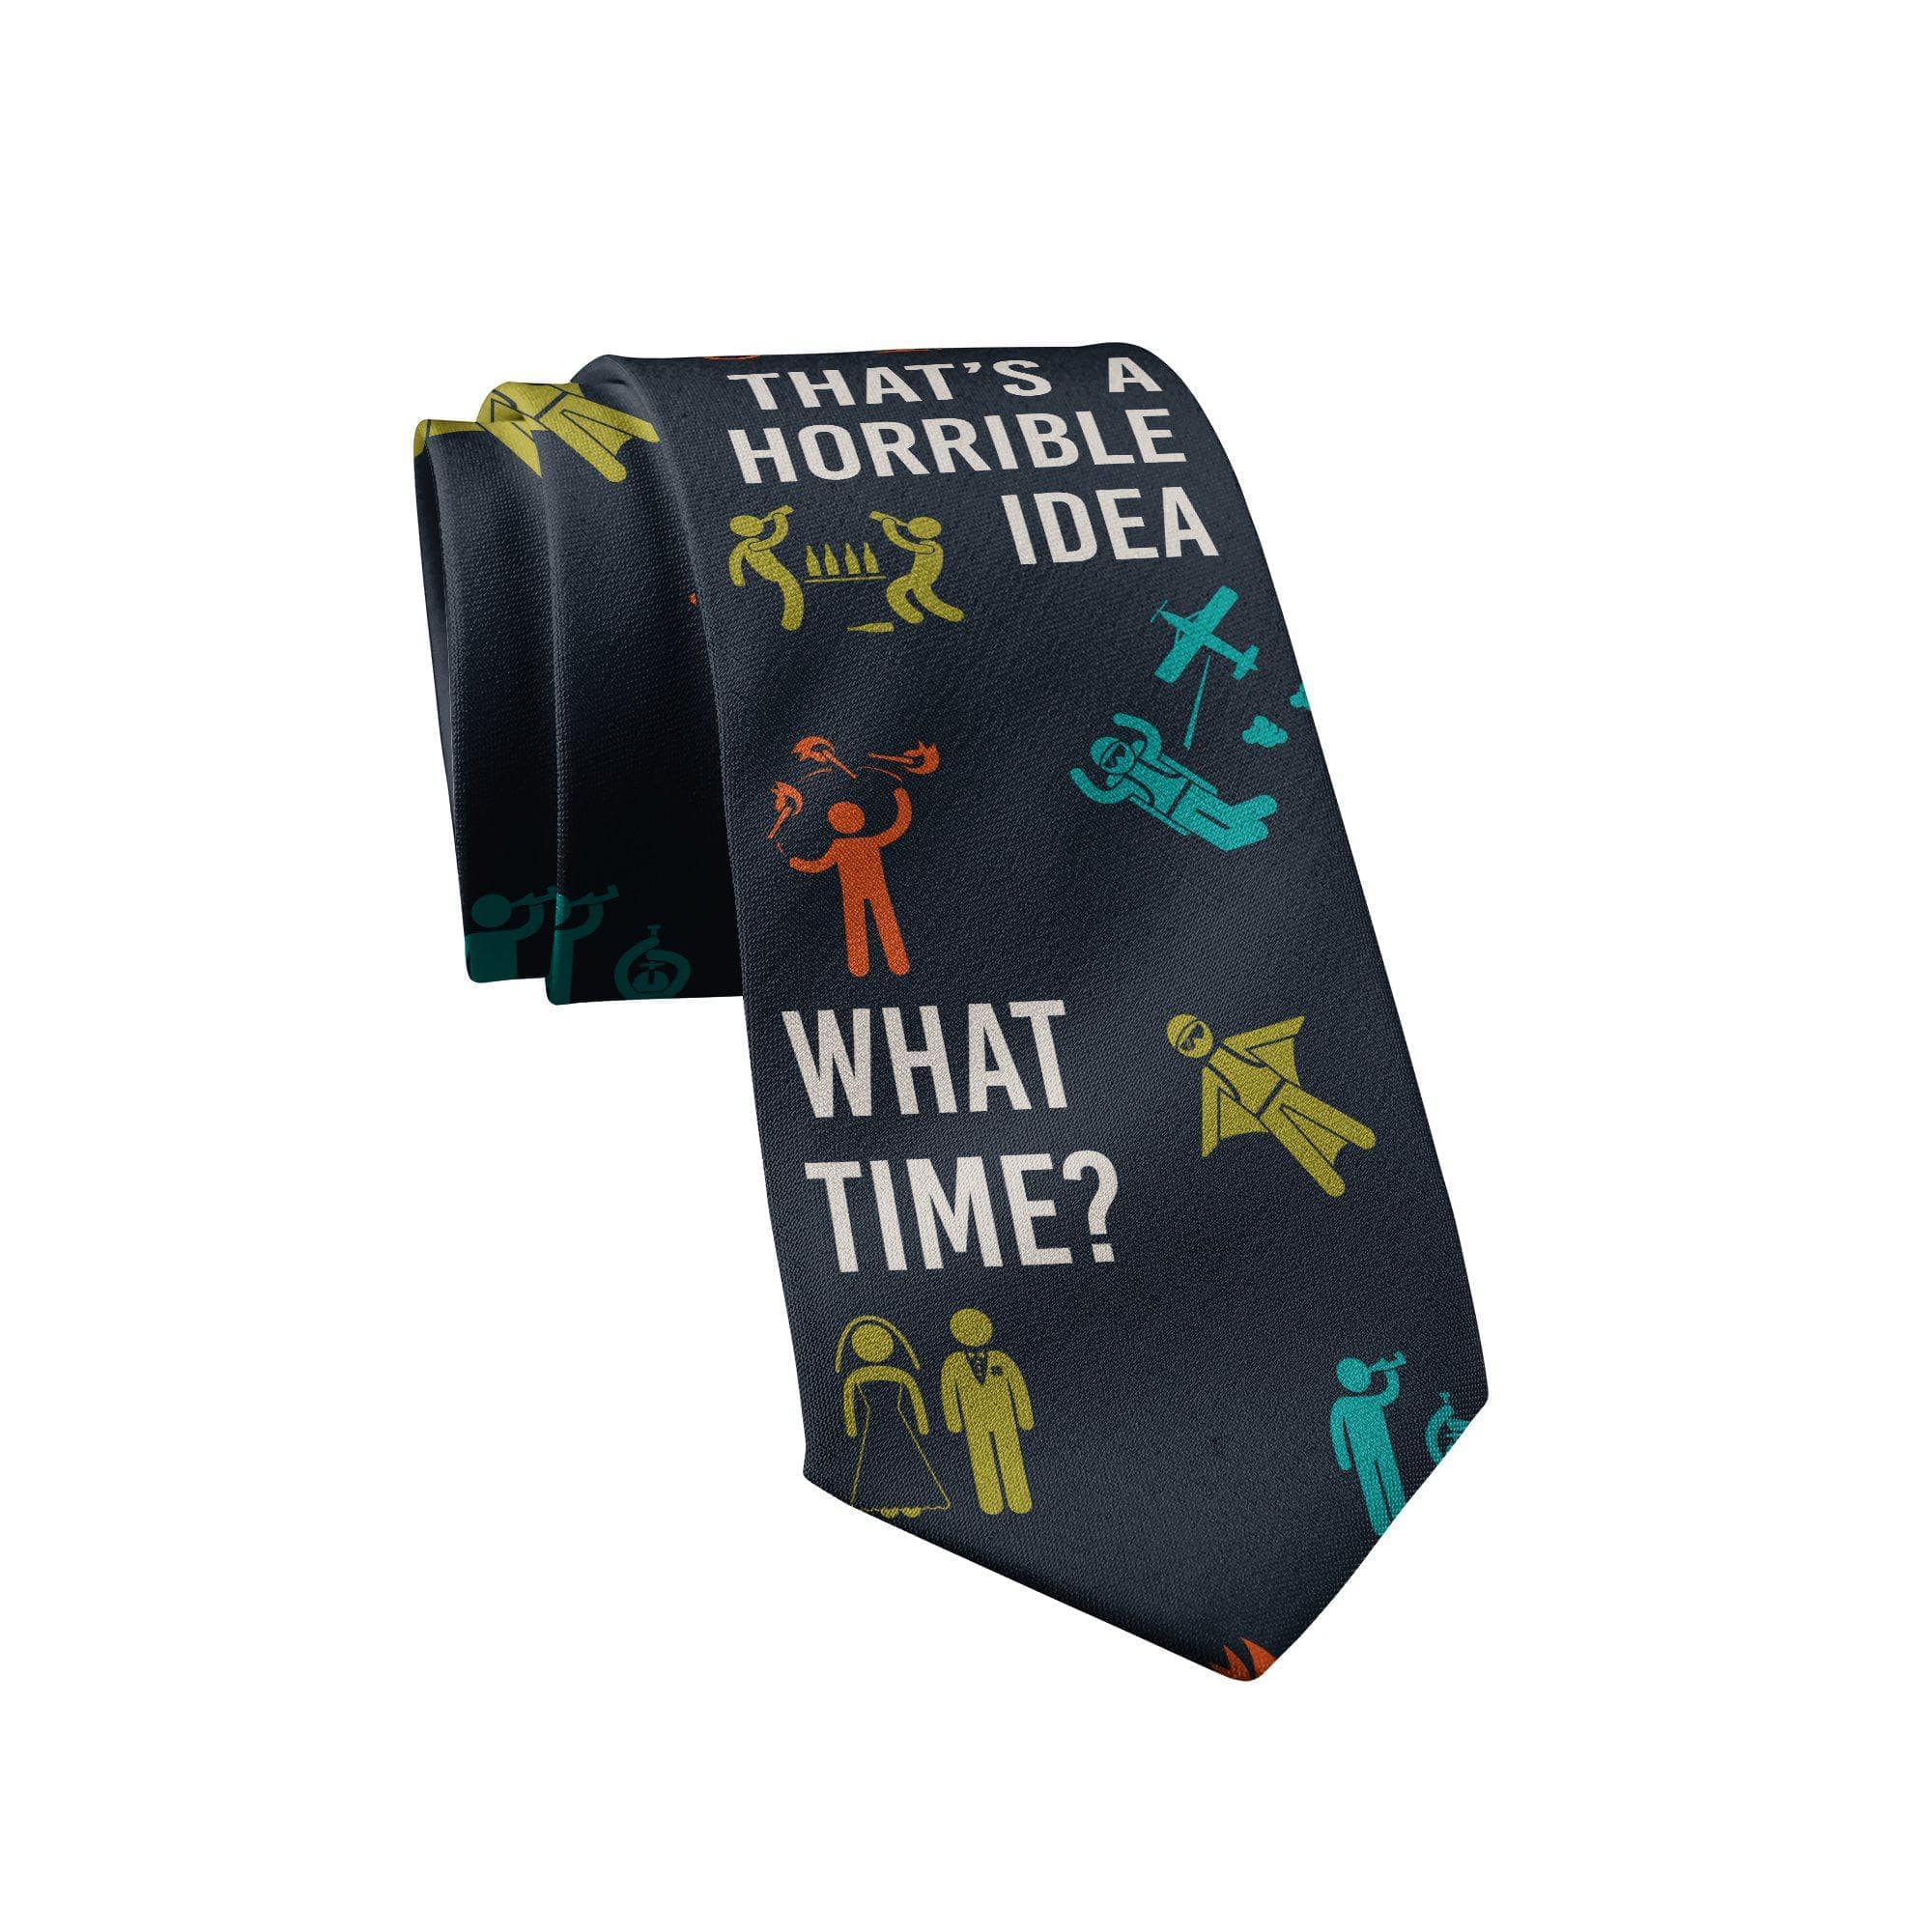 That's A Horrible Idea What Time Neck Tie - Crazy Dog T-Shirts